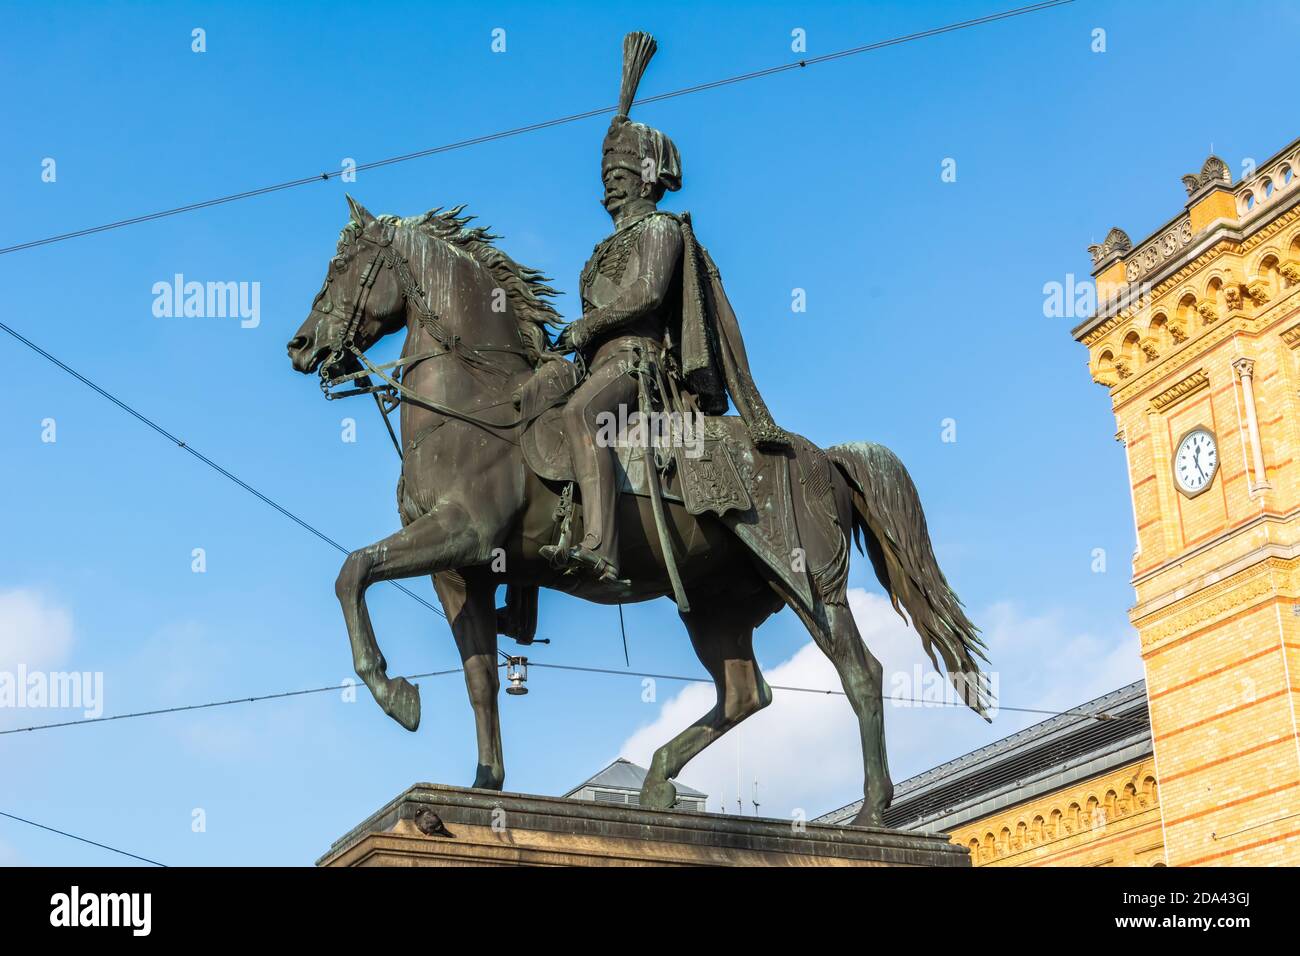 Hanover, Germany – January 27, 2018. Equestrian statue of Ernest Augustus, King of Hanover, in Hanover. The monument was erected in 1871 by Albert Wol Stock Photo